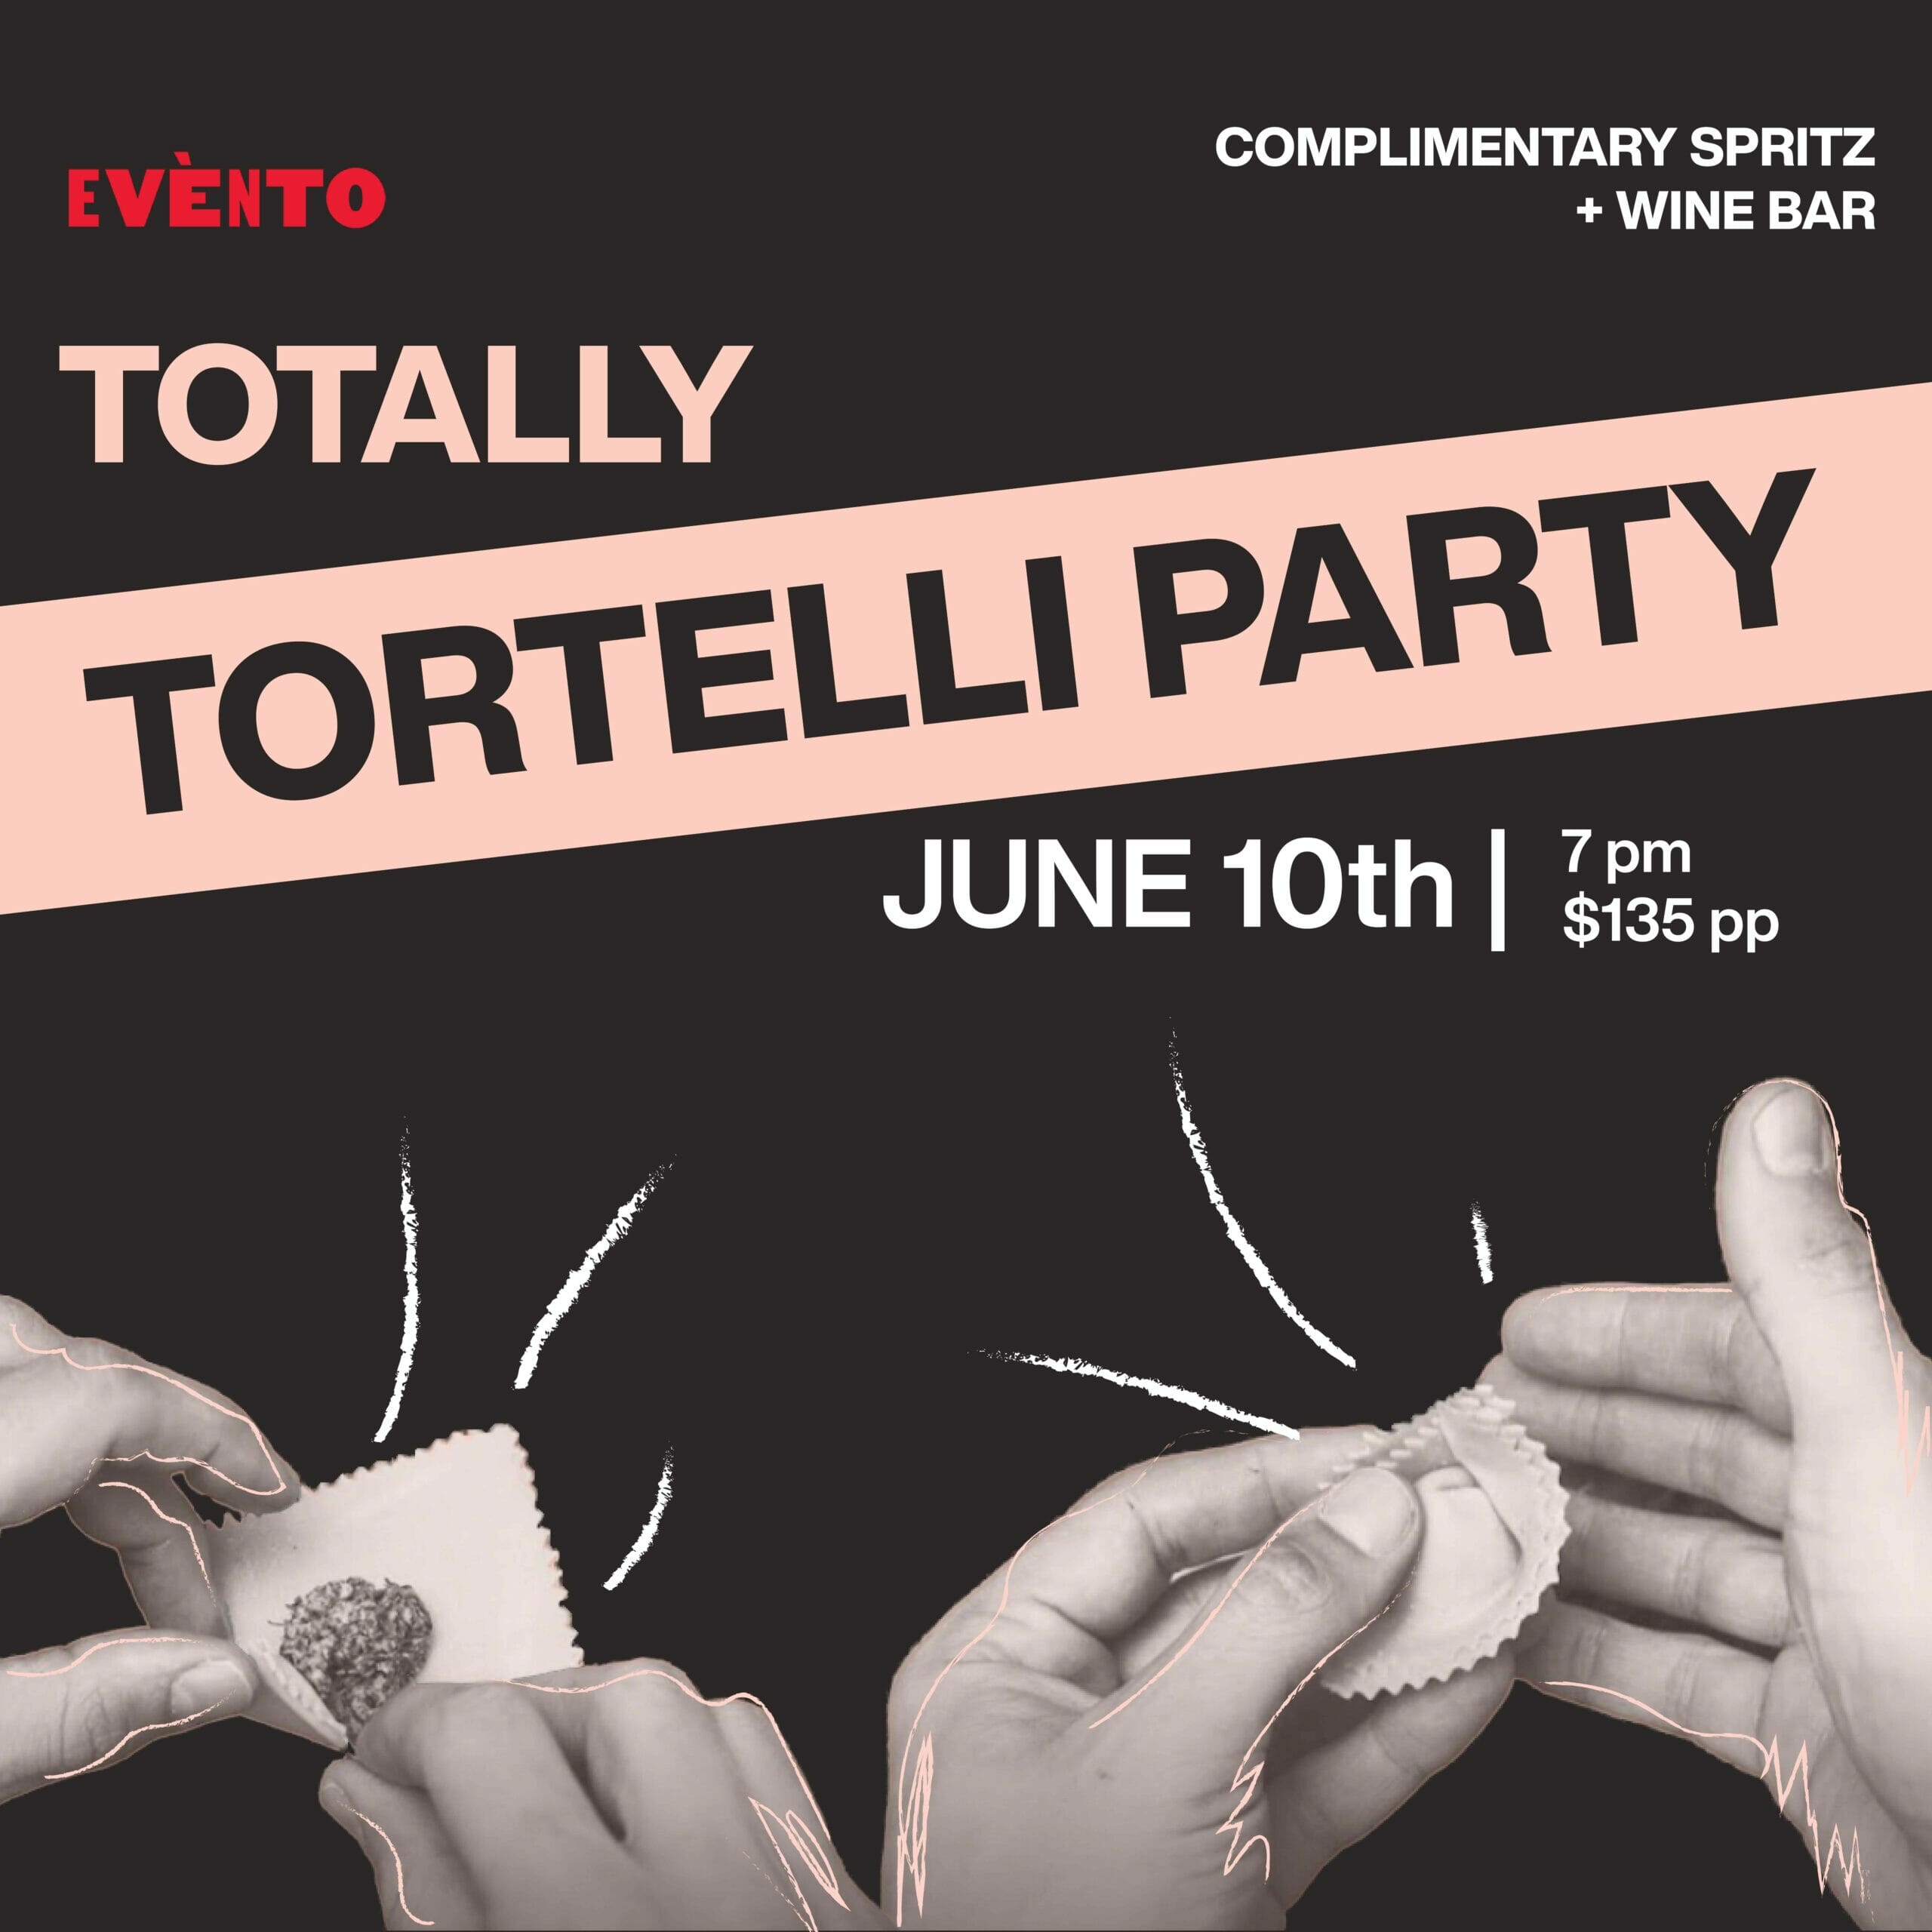 TOTALLY TORTELLI [pasta making] PARTY *SOLD OUT*